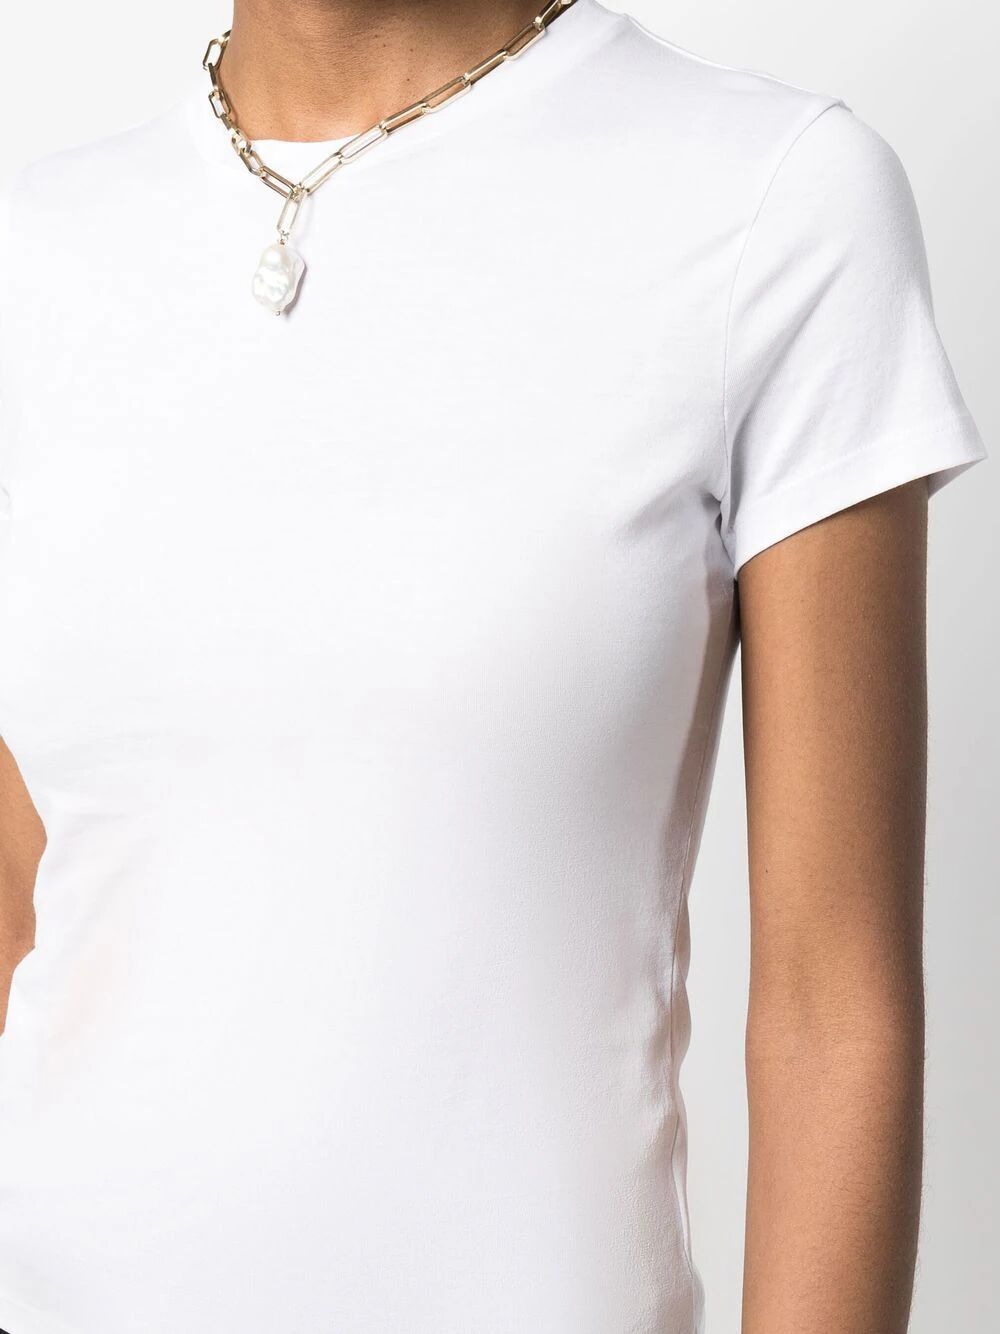 Shop Theory Tiny Tee In White